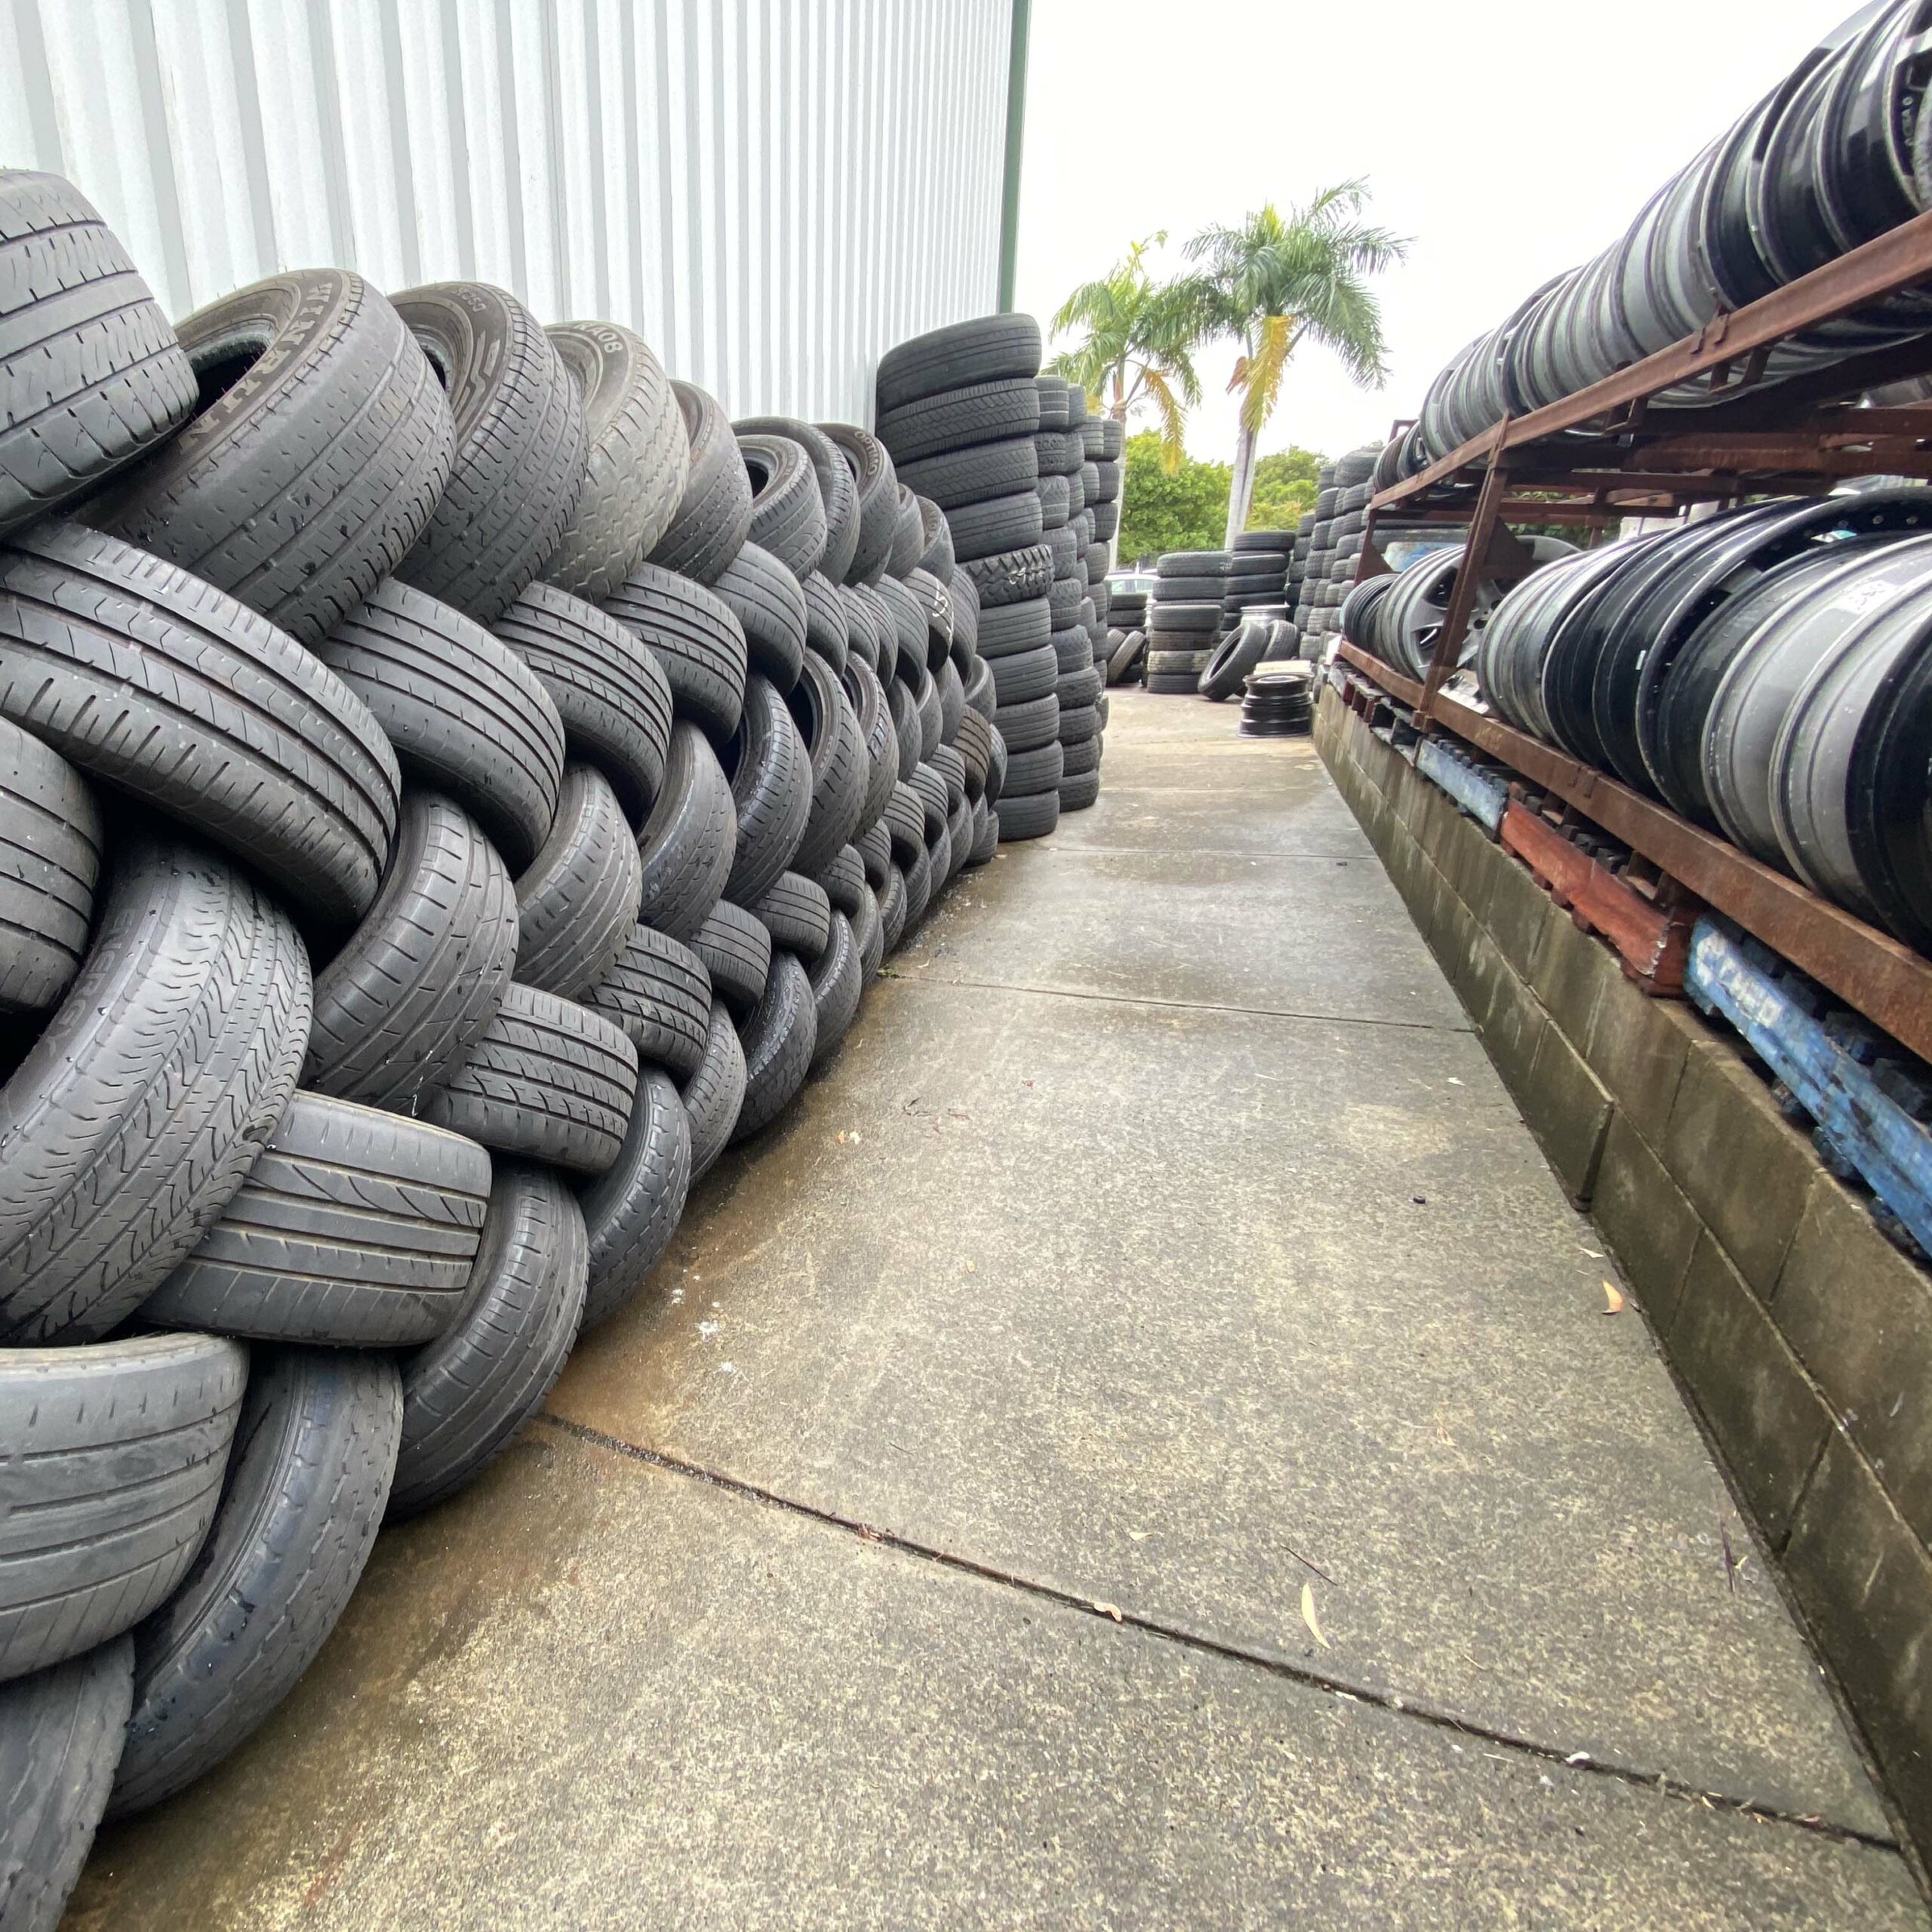 Rows of tyres stacked up outside the Branigans Burleigh Heads tyre shop in the Gold Coast.